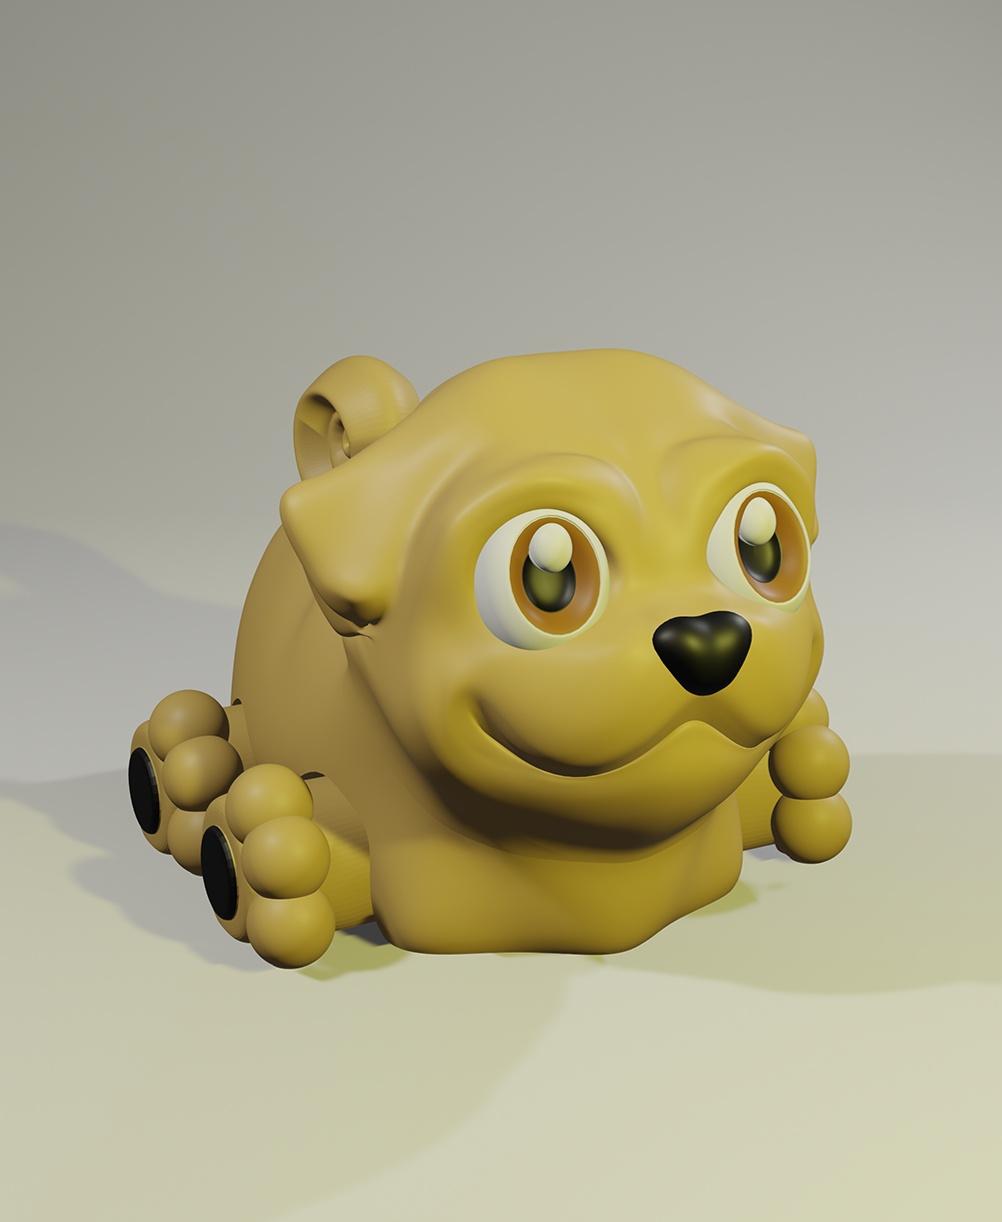 Flexi Pug - Articulated Dog, Style #1 3d model